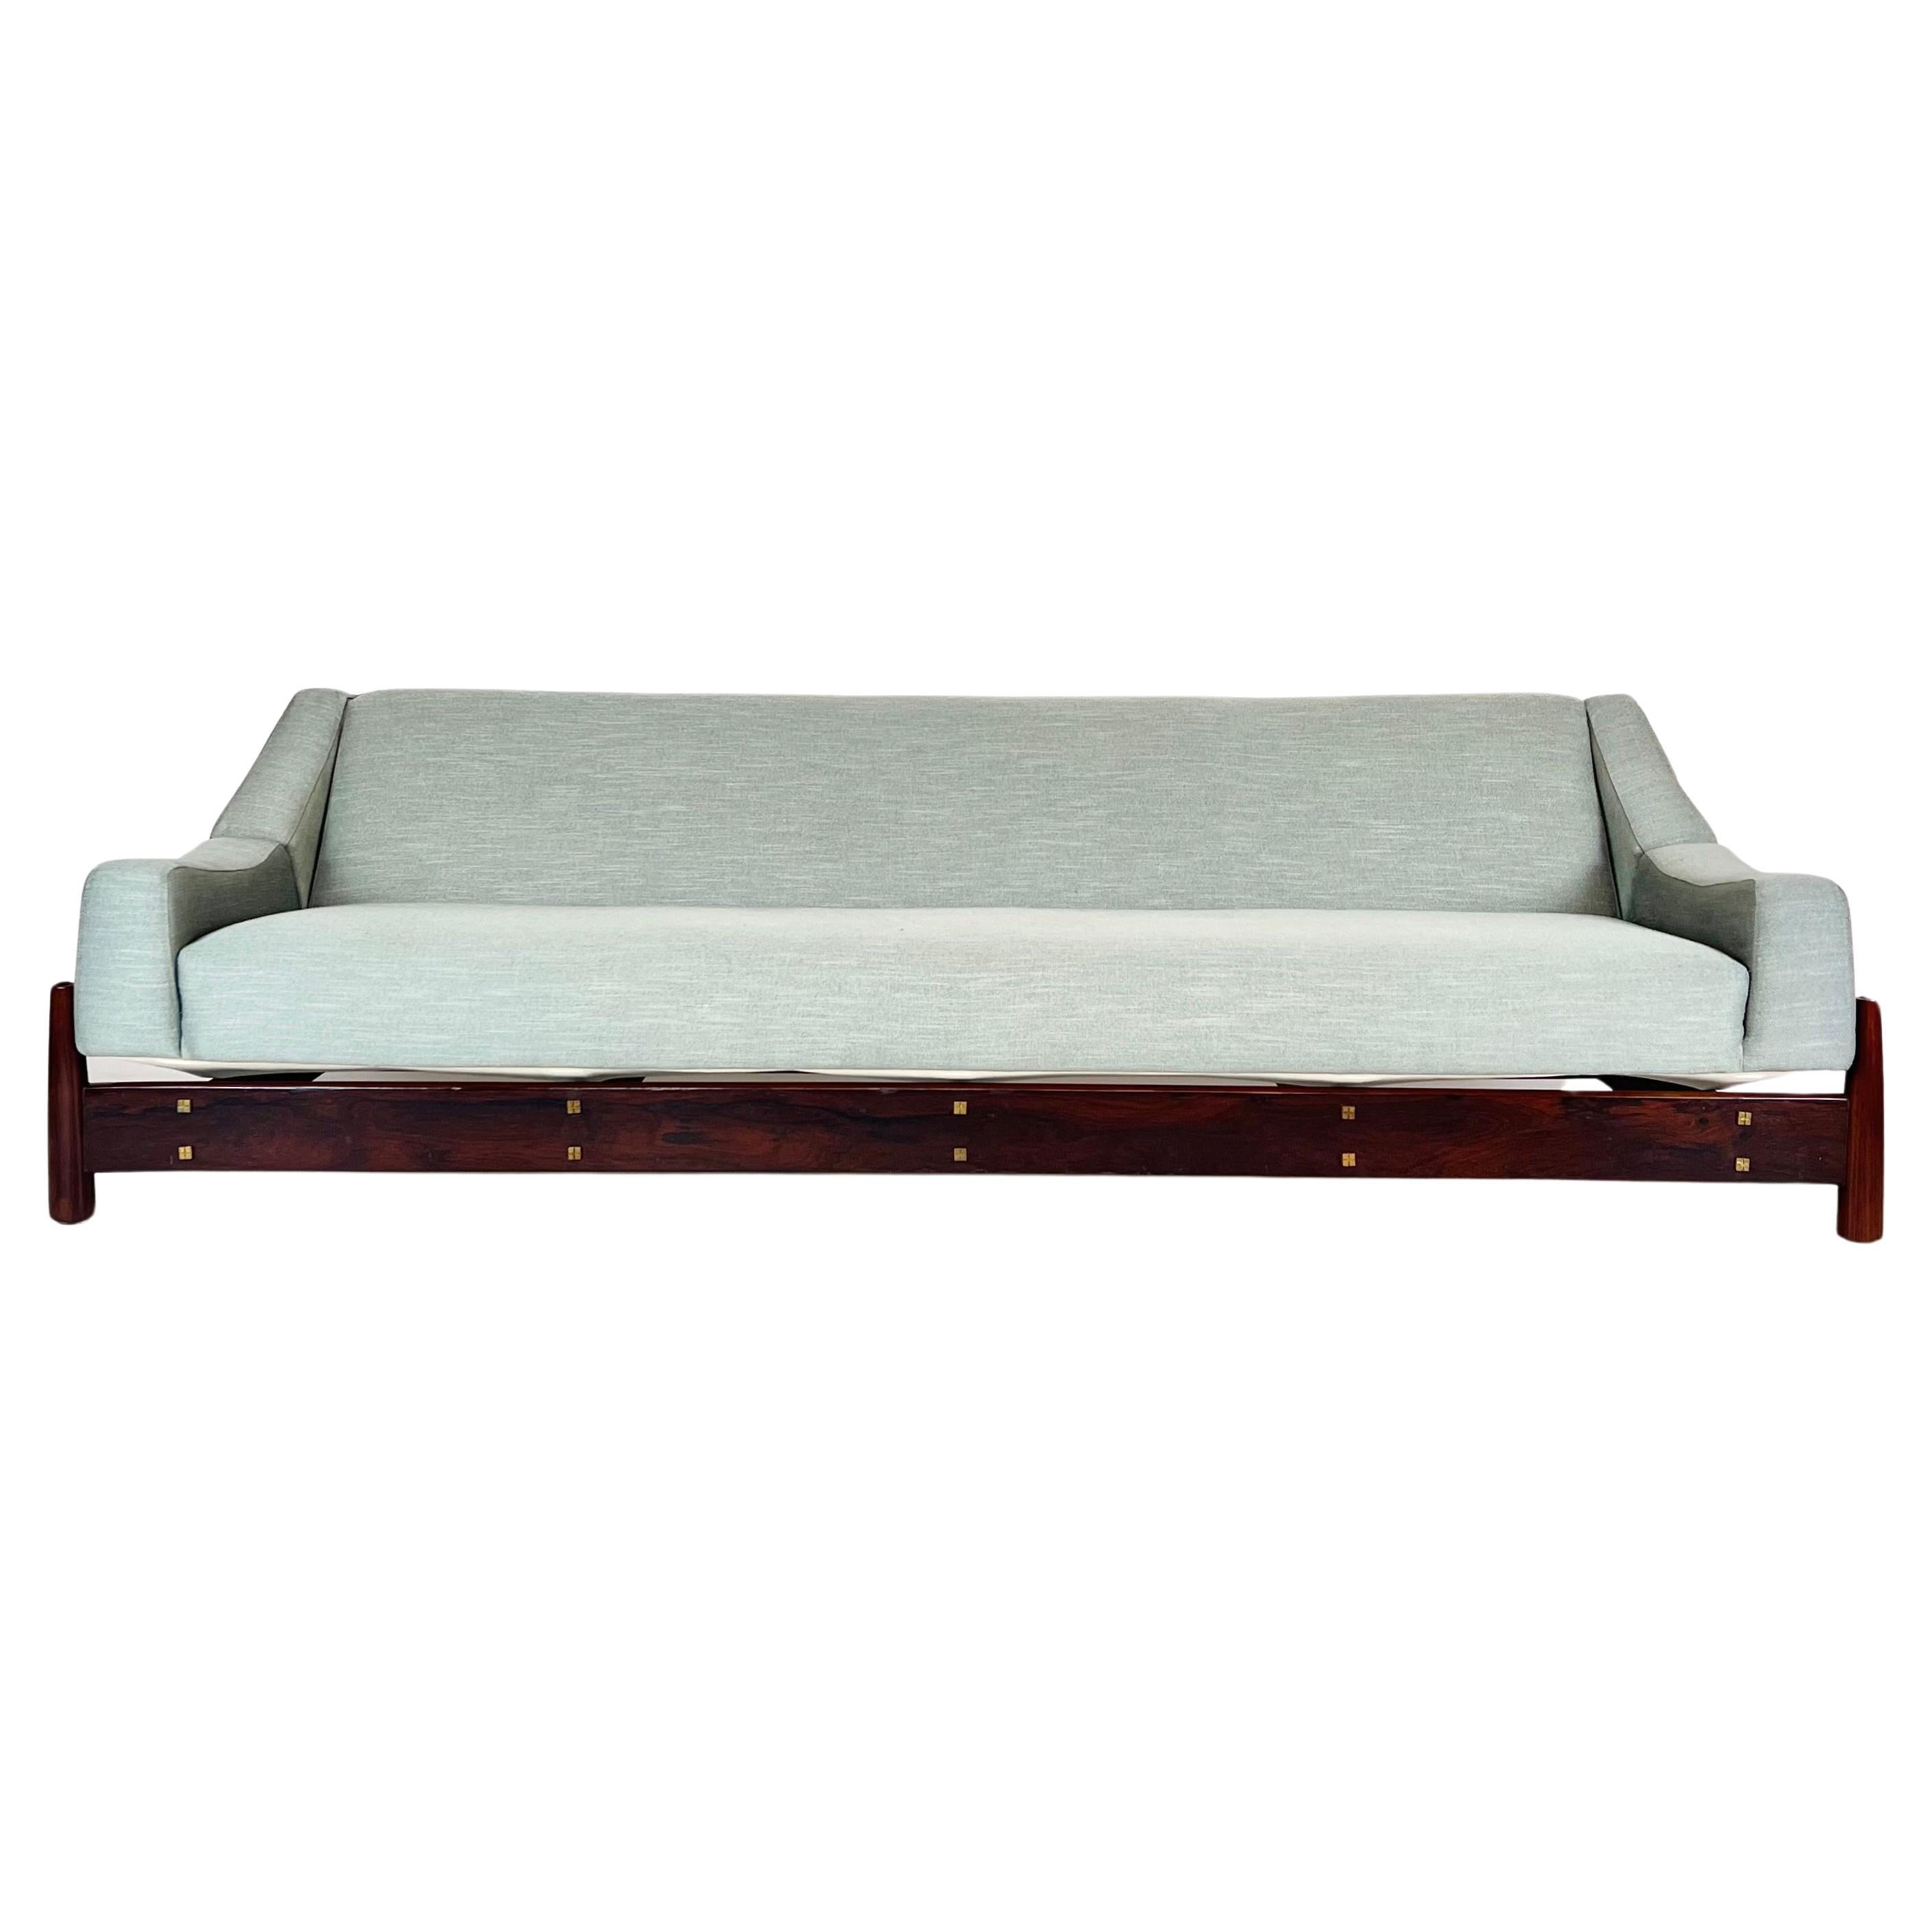 Cimo S/A Sofa from the 60s, Brazil, structure in Jacaranda For Sale